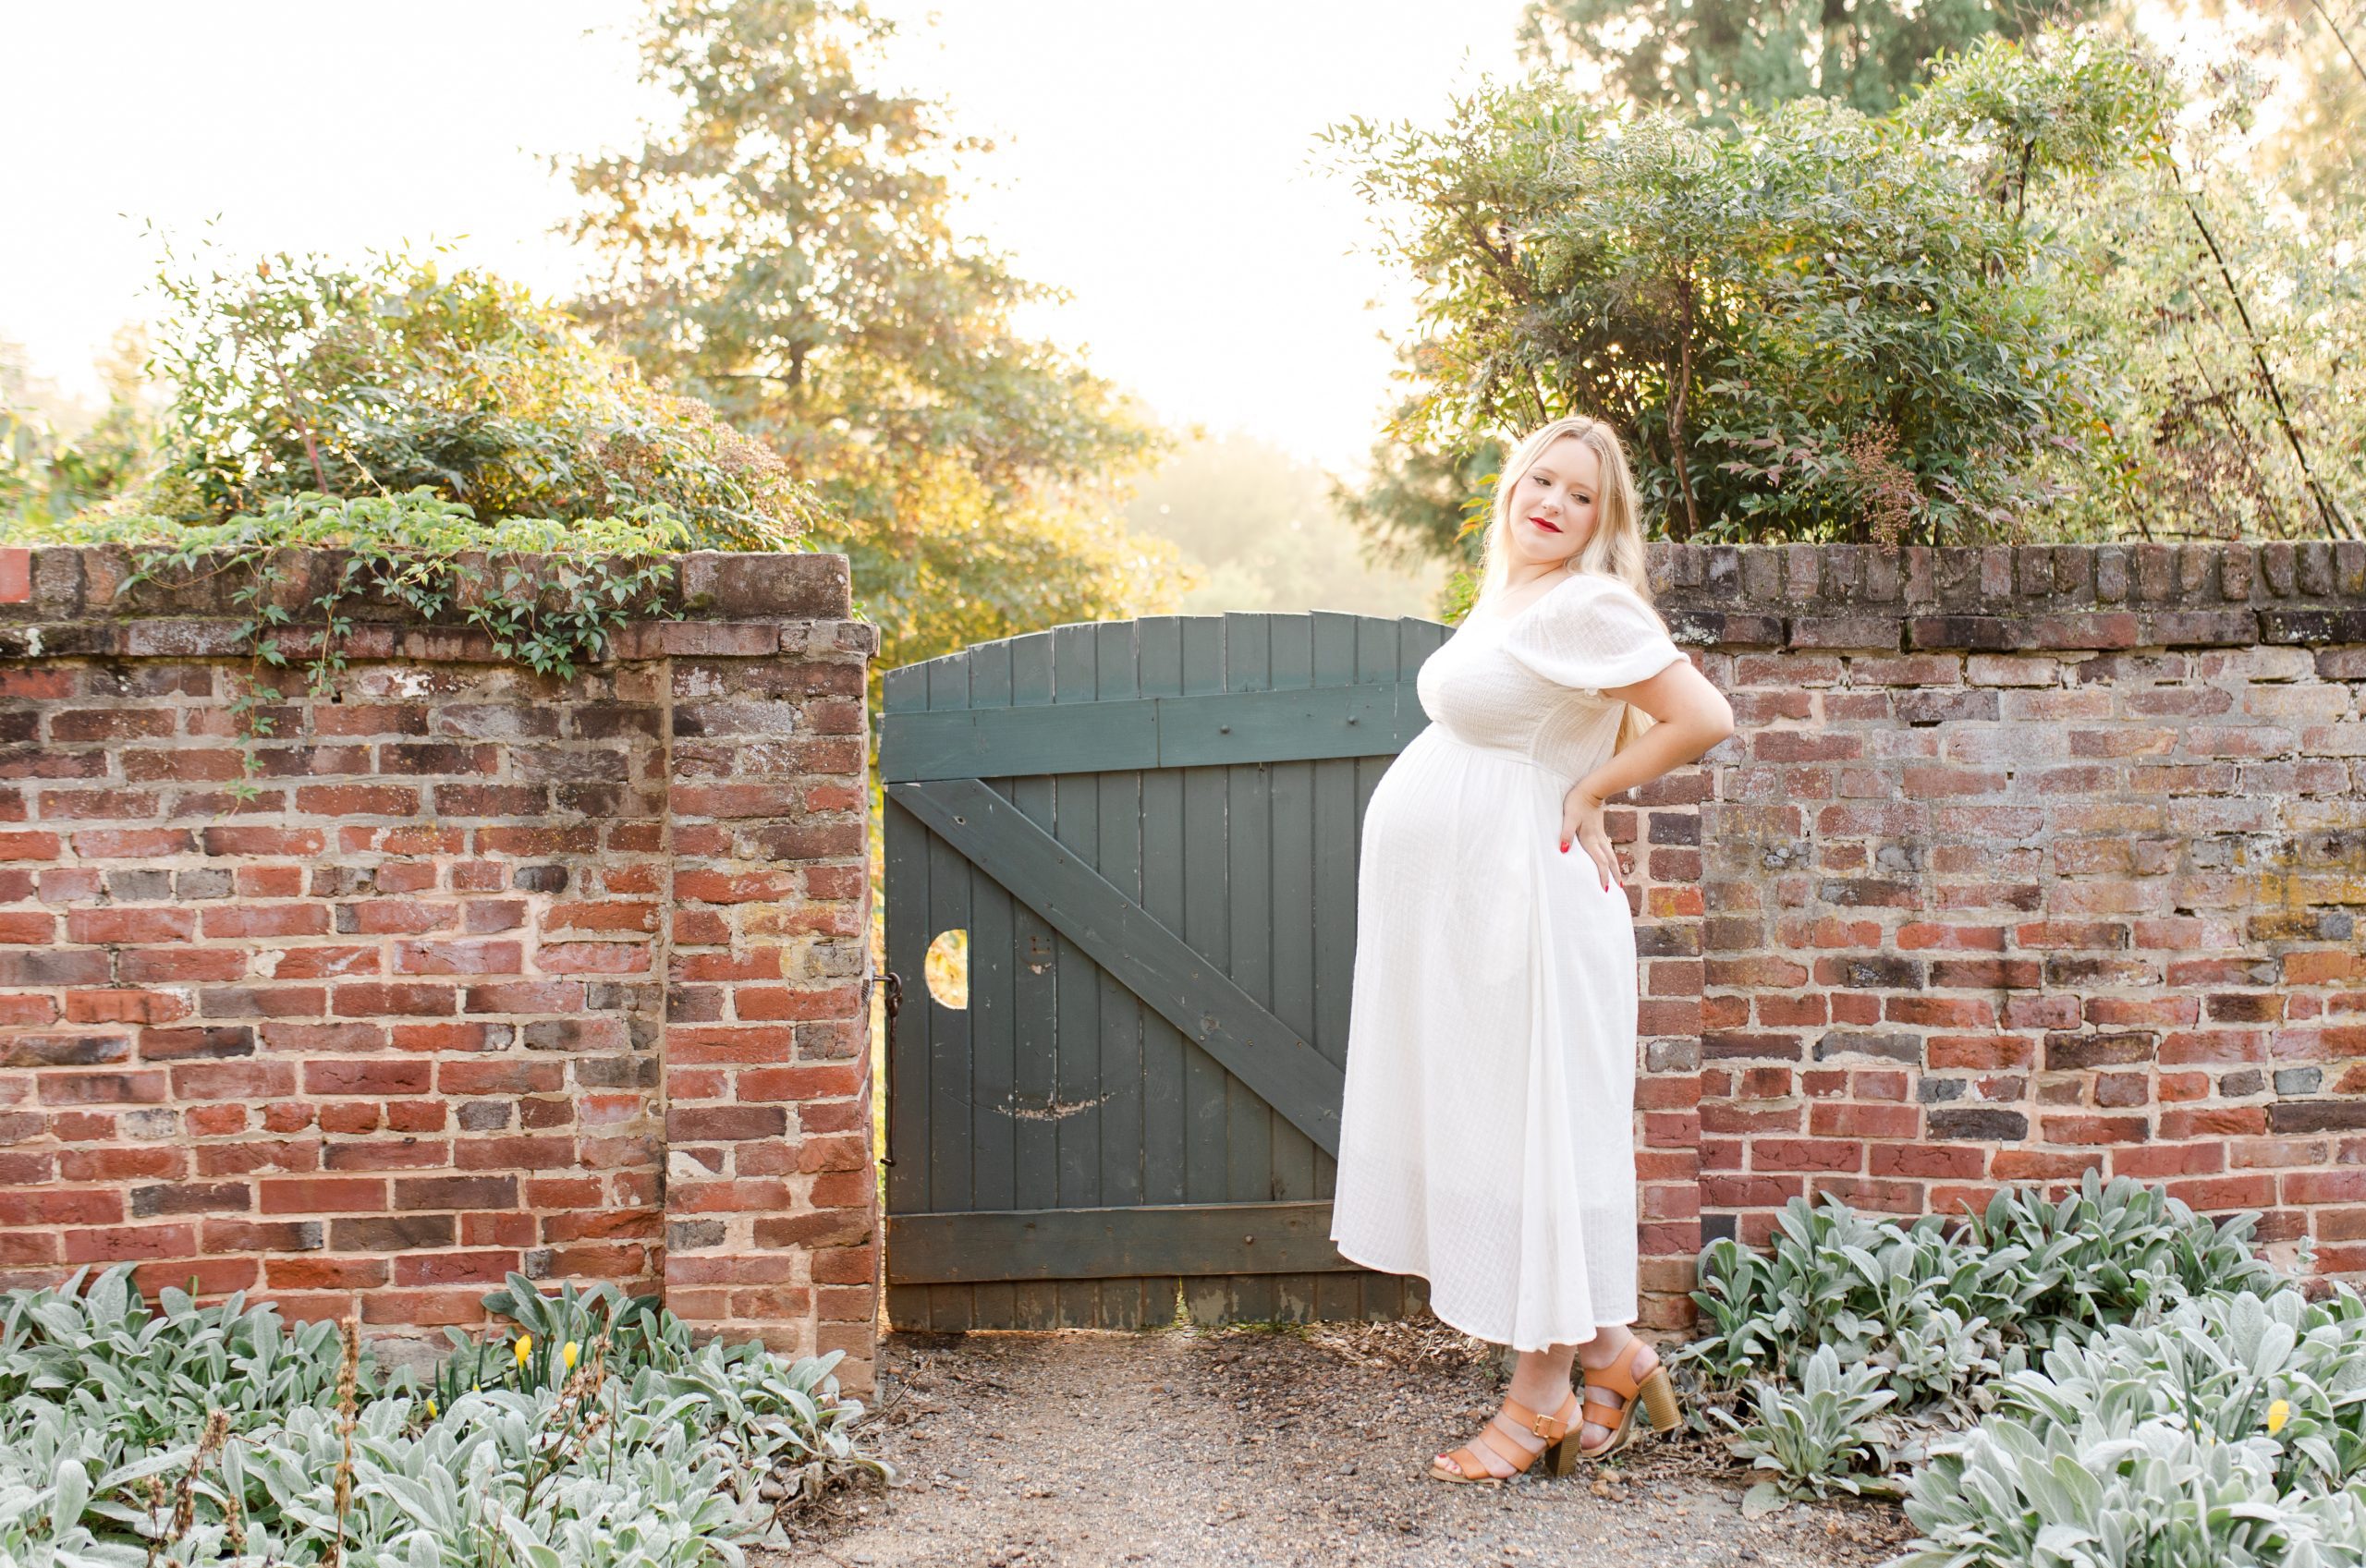 mom-to-be standing in a garden near a brick wall with a gate by Northern Virginia Maternity Photographer